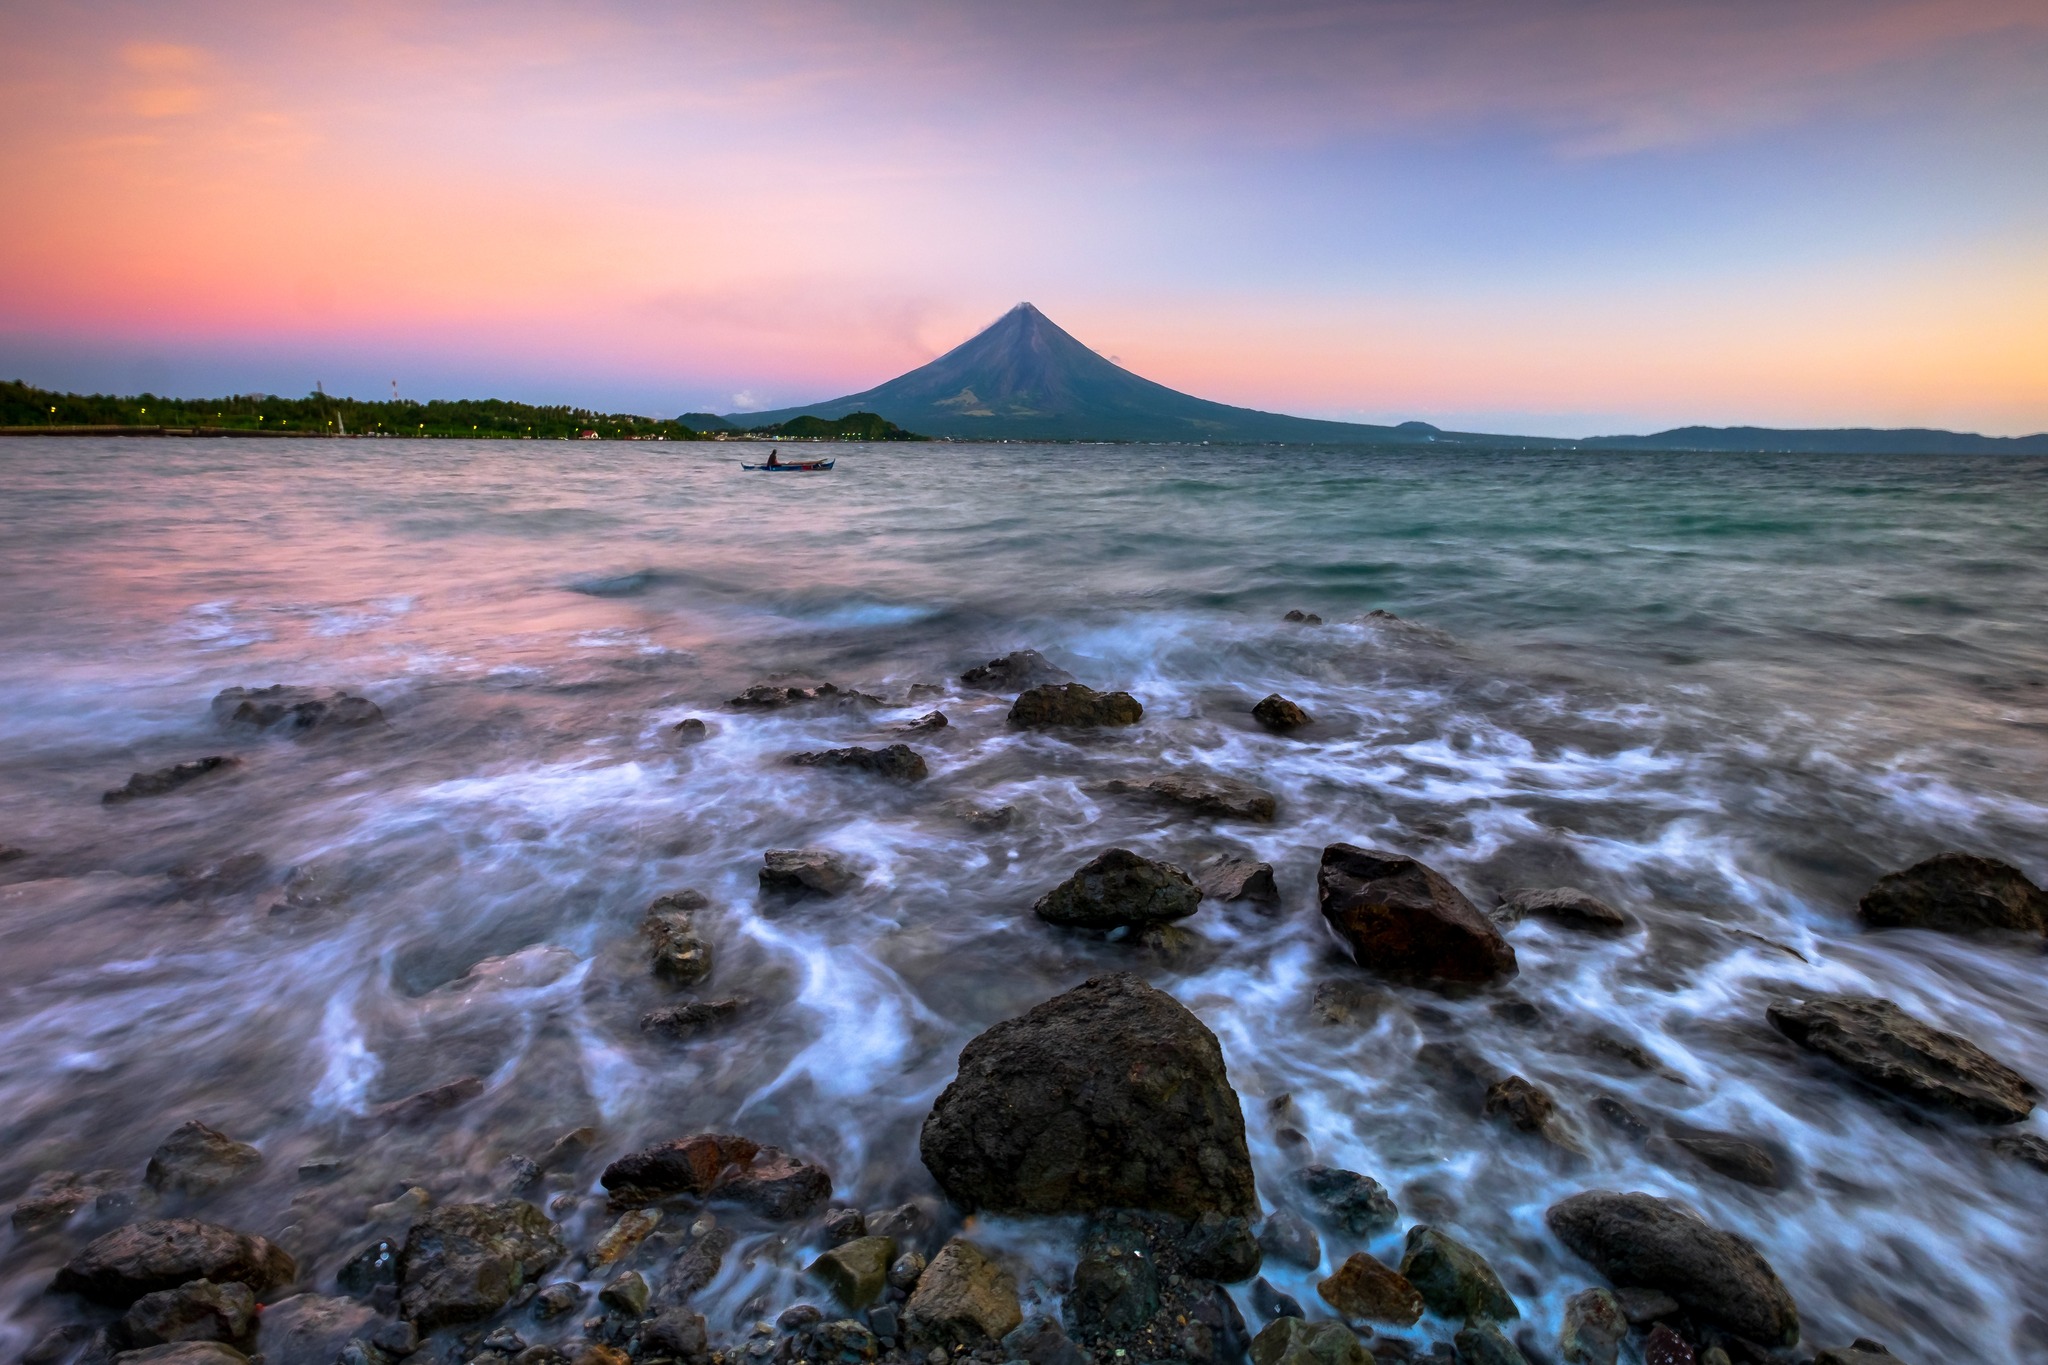 The Majestic Mayon Volcano